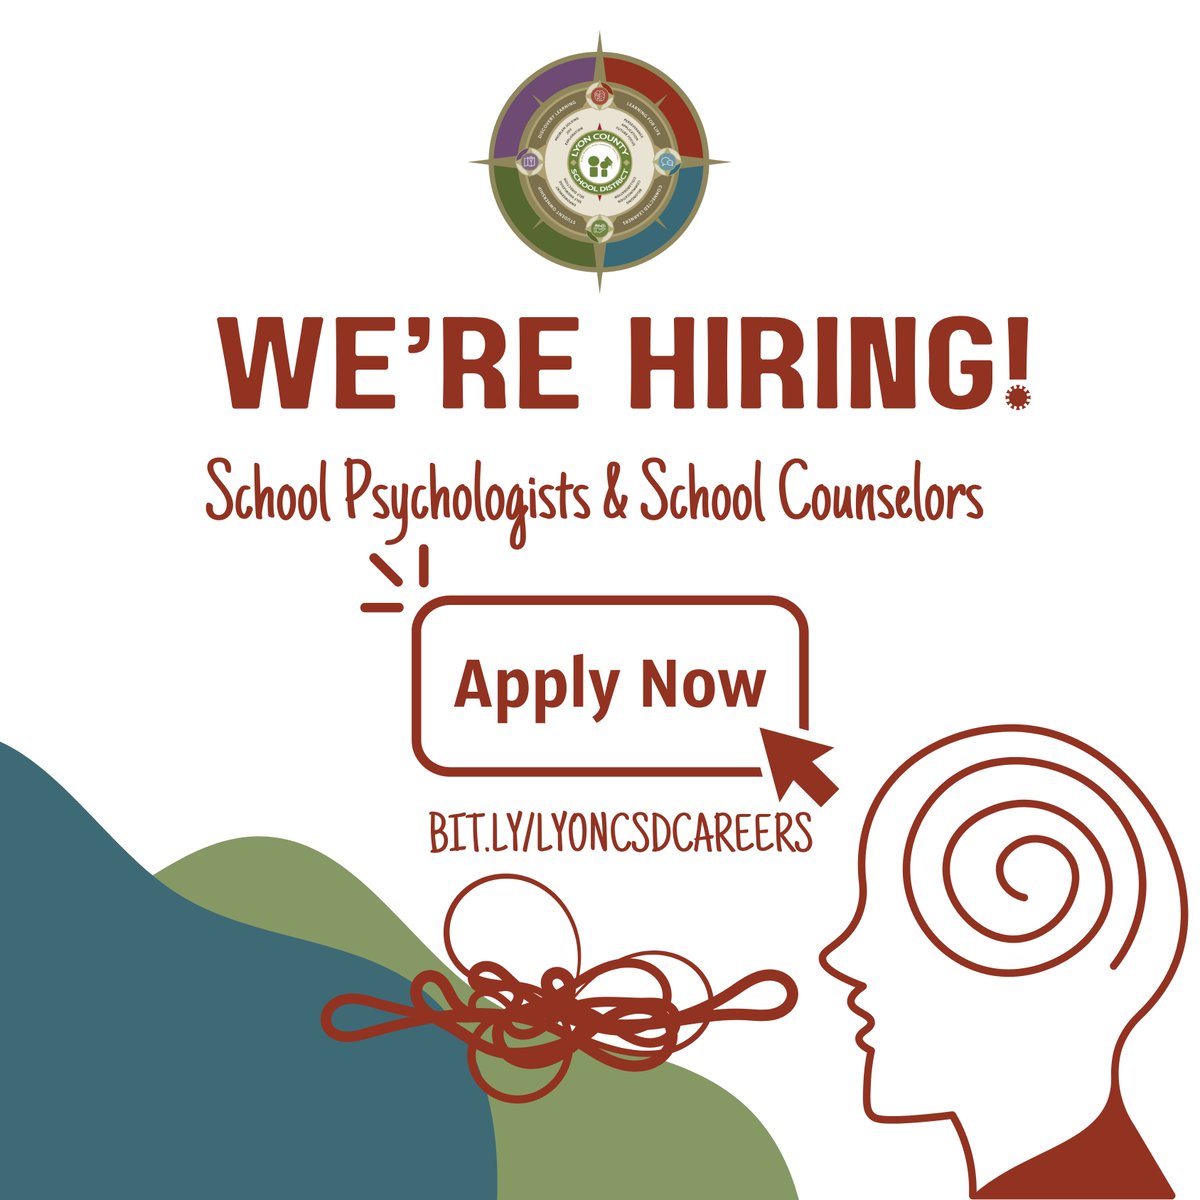 🧠💼 Lyon County School District is hiring school psychologists & counselors! $3K hiring bonus to make a difference in students' lives. Apply: bit.ly/lyoncsdcareers 🎓✨ #SchoolPsychologist #SchoolCounselor #JoinUs